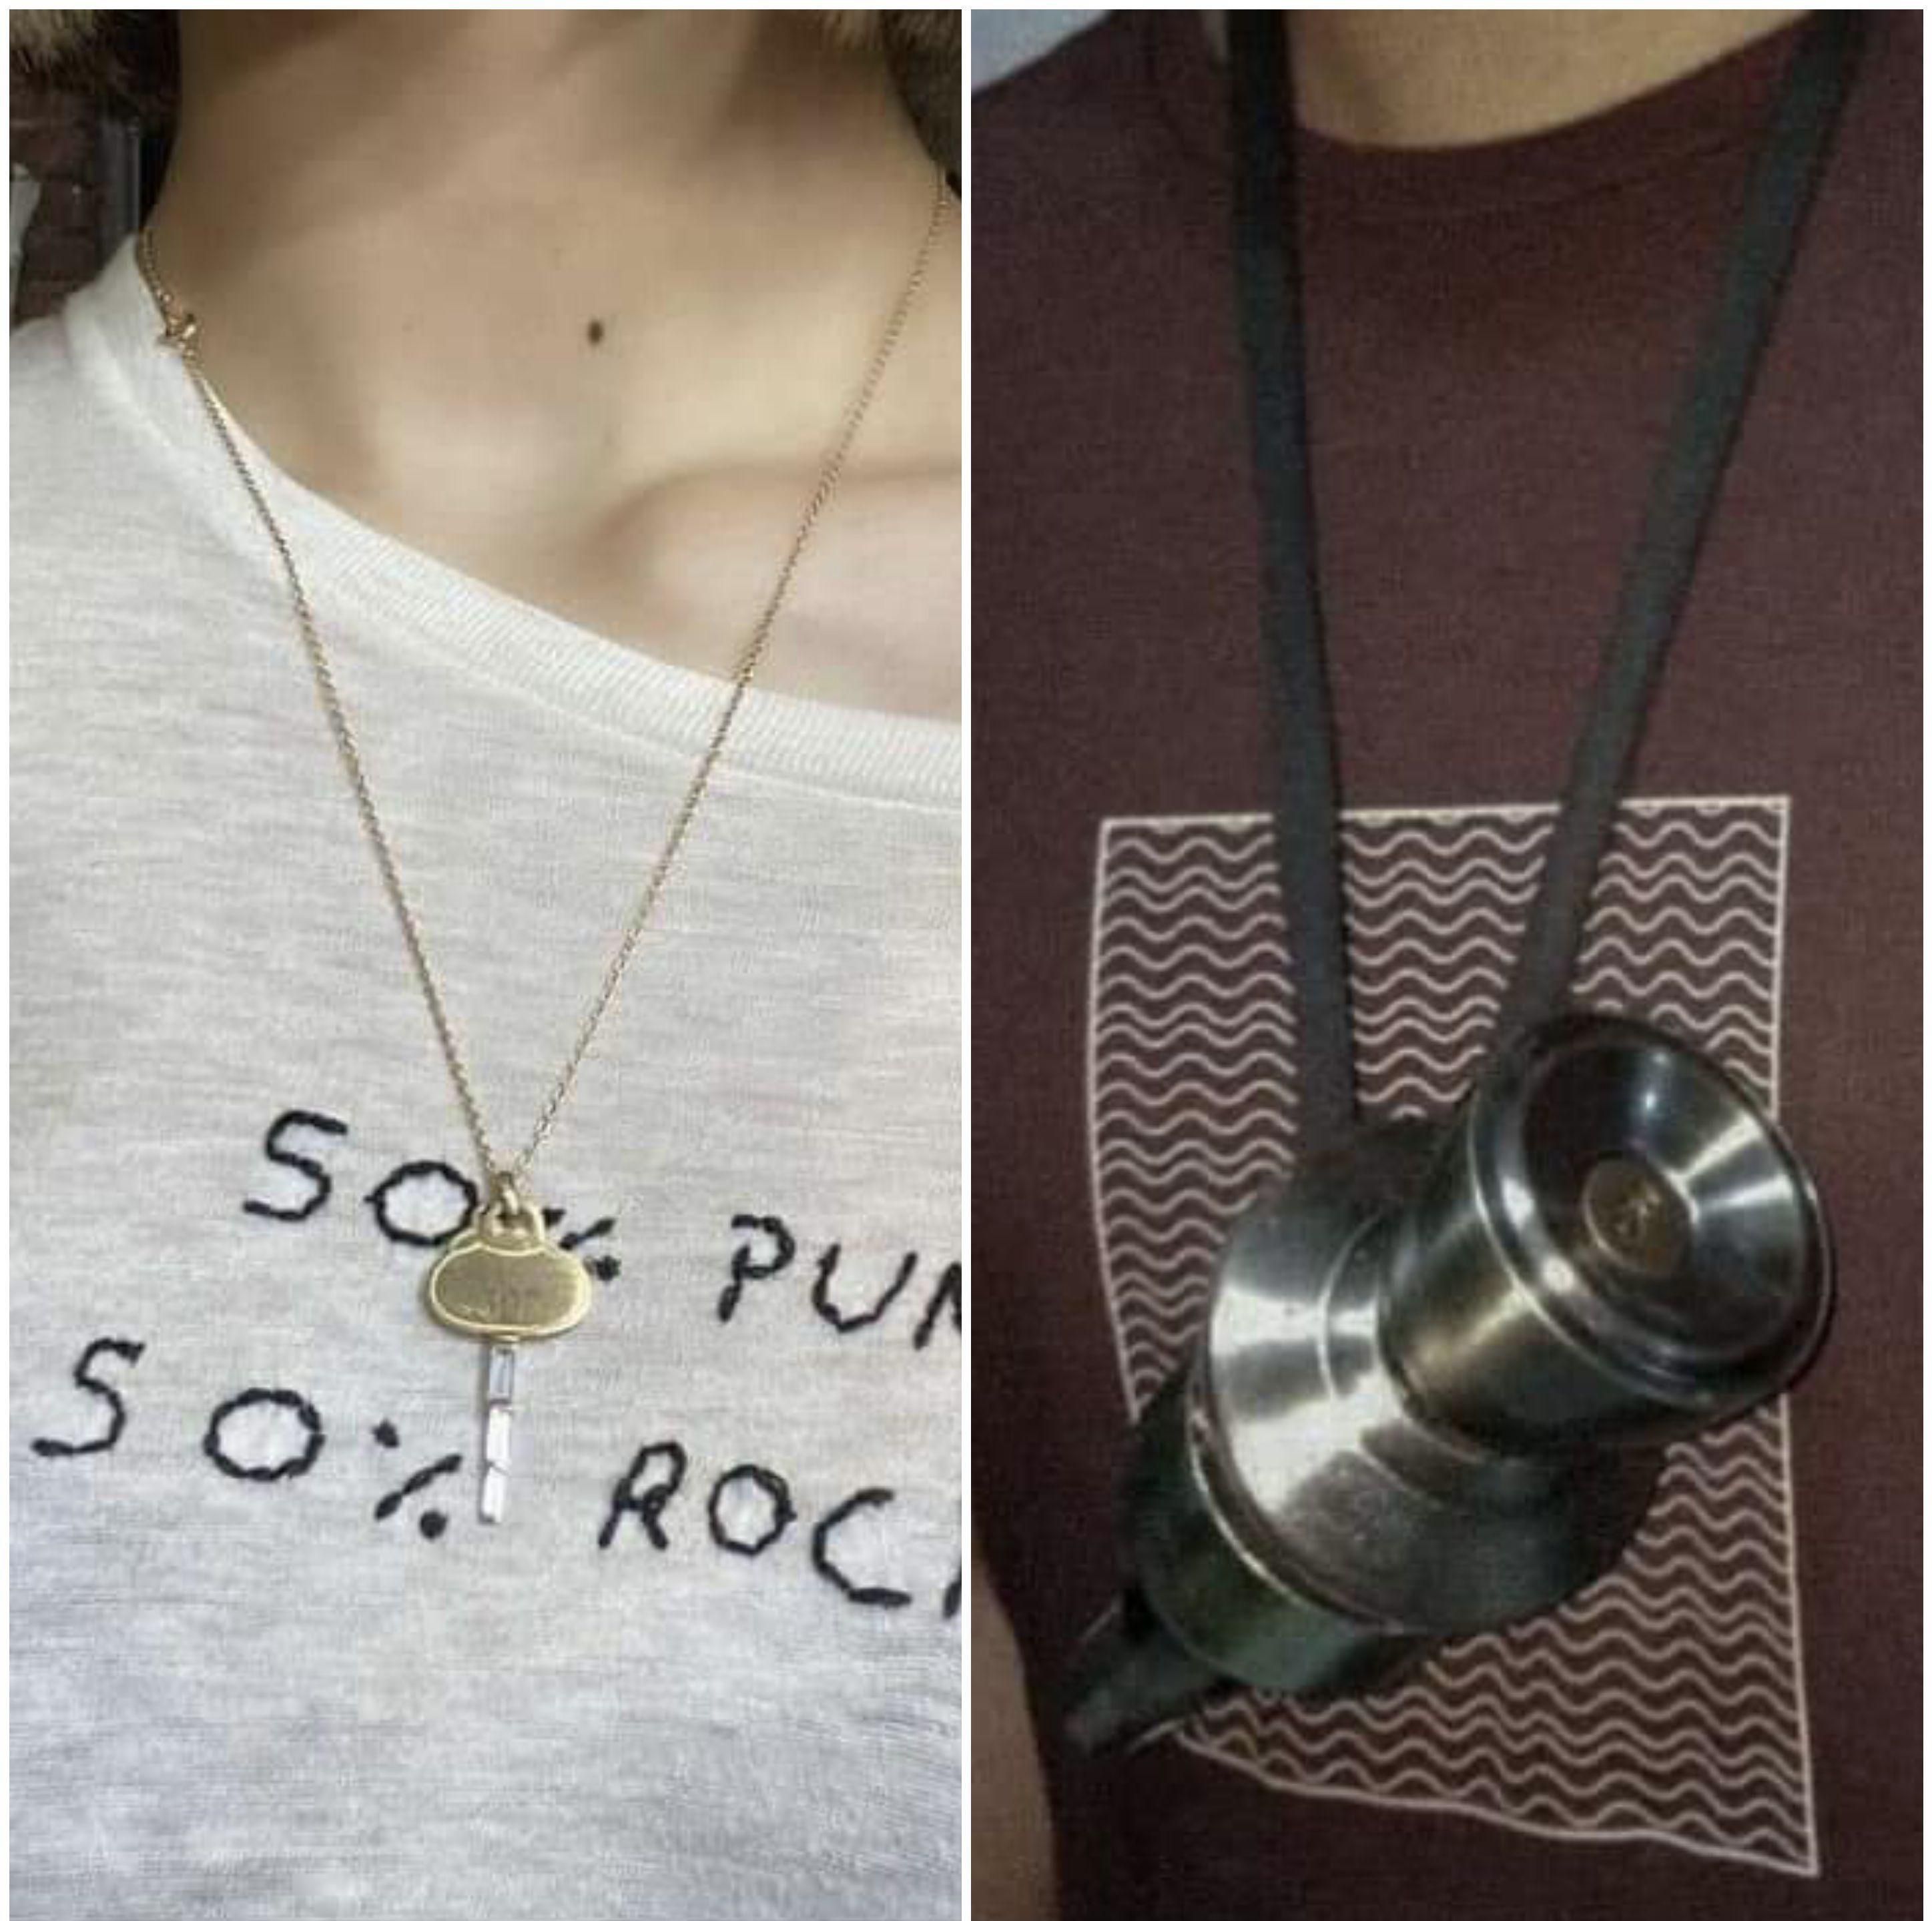 The most stylish couples necklace.